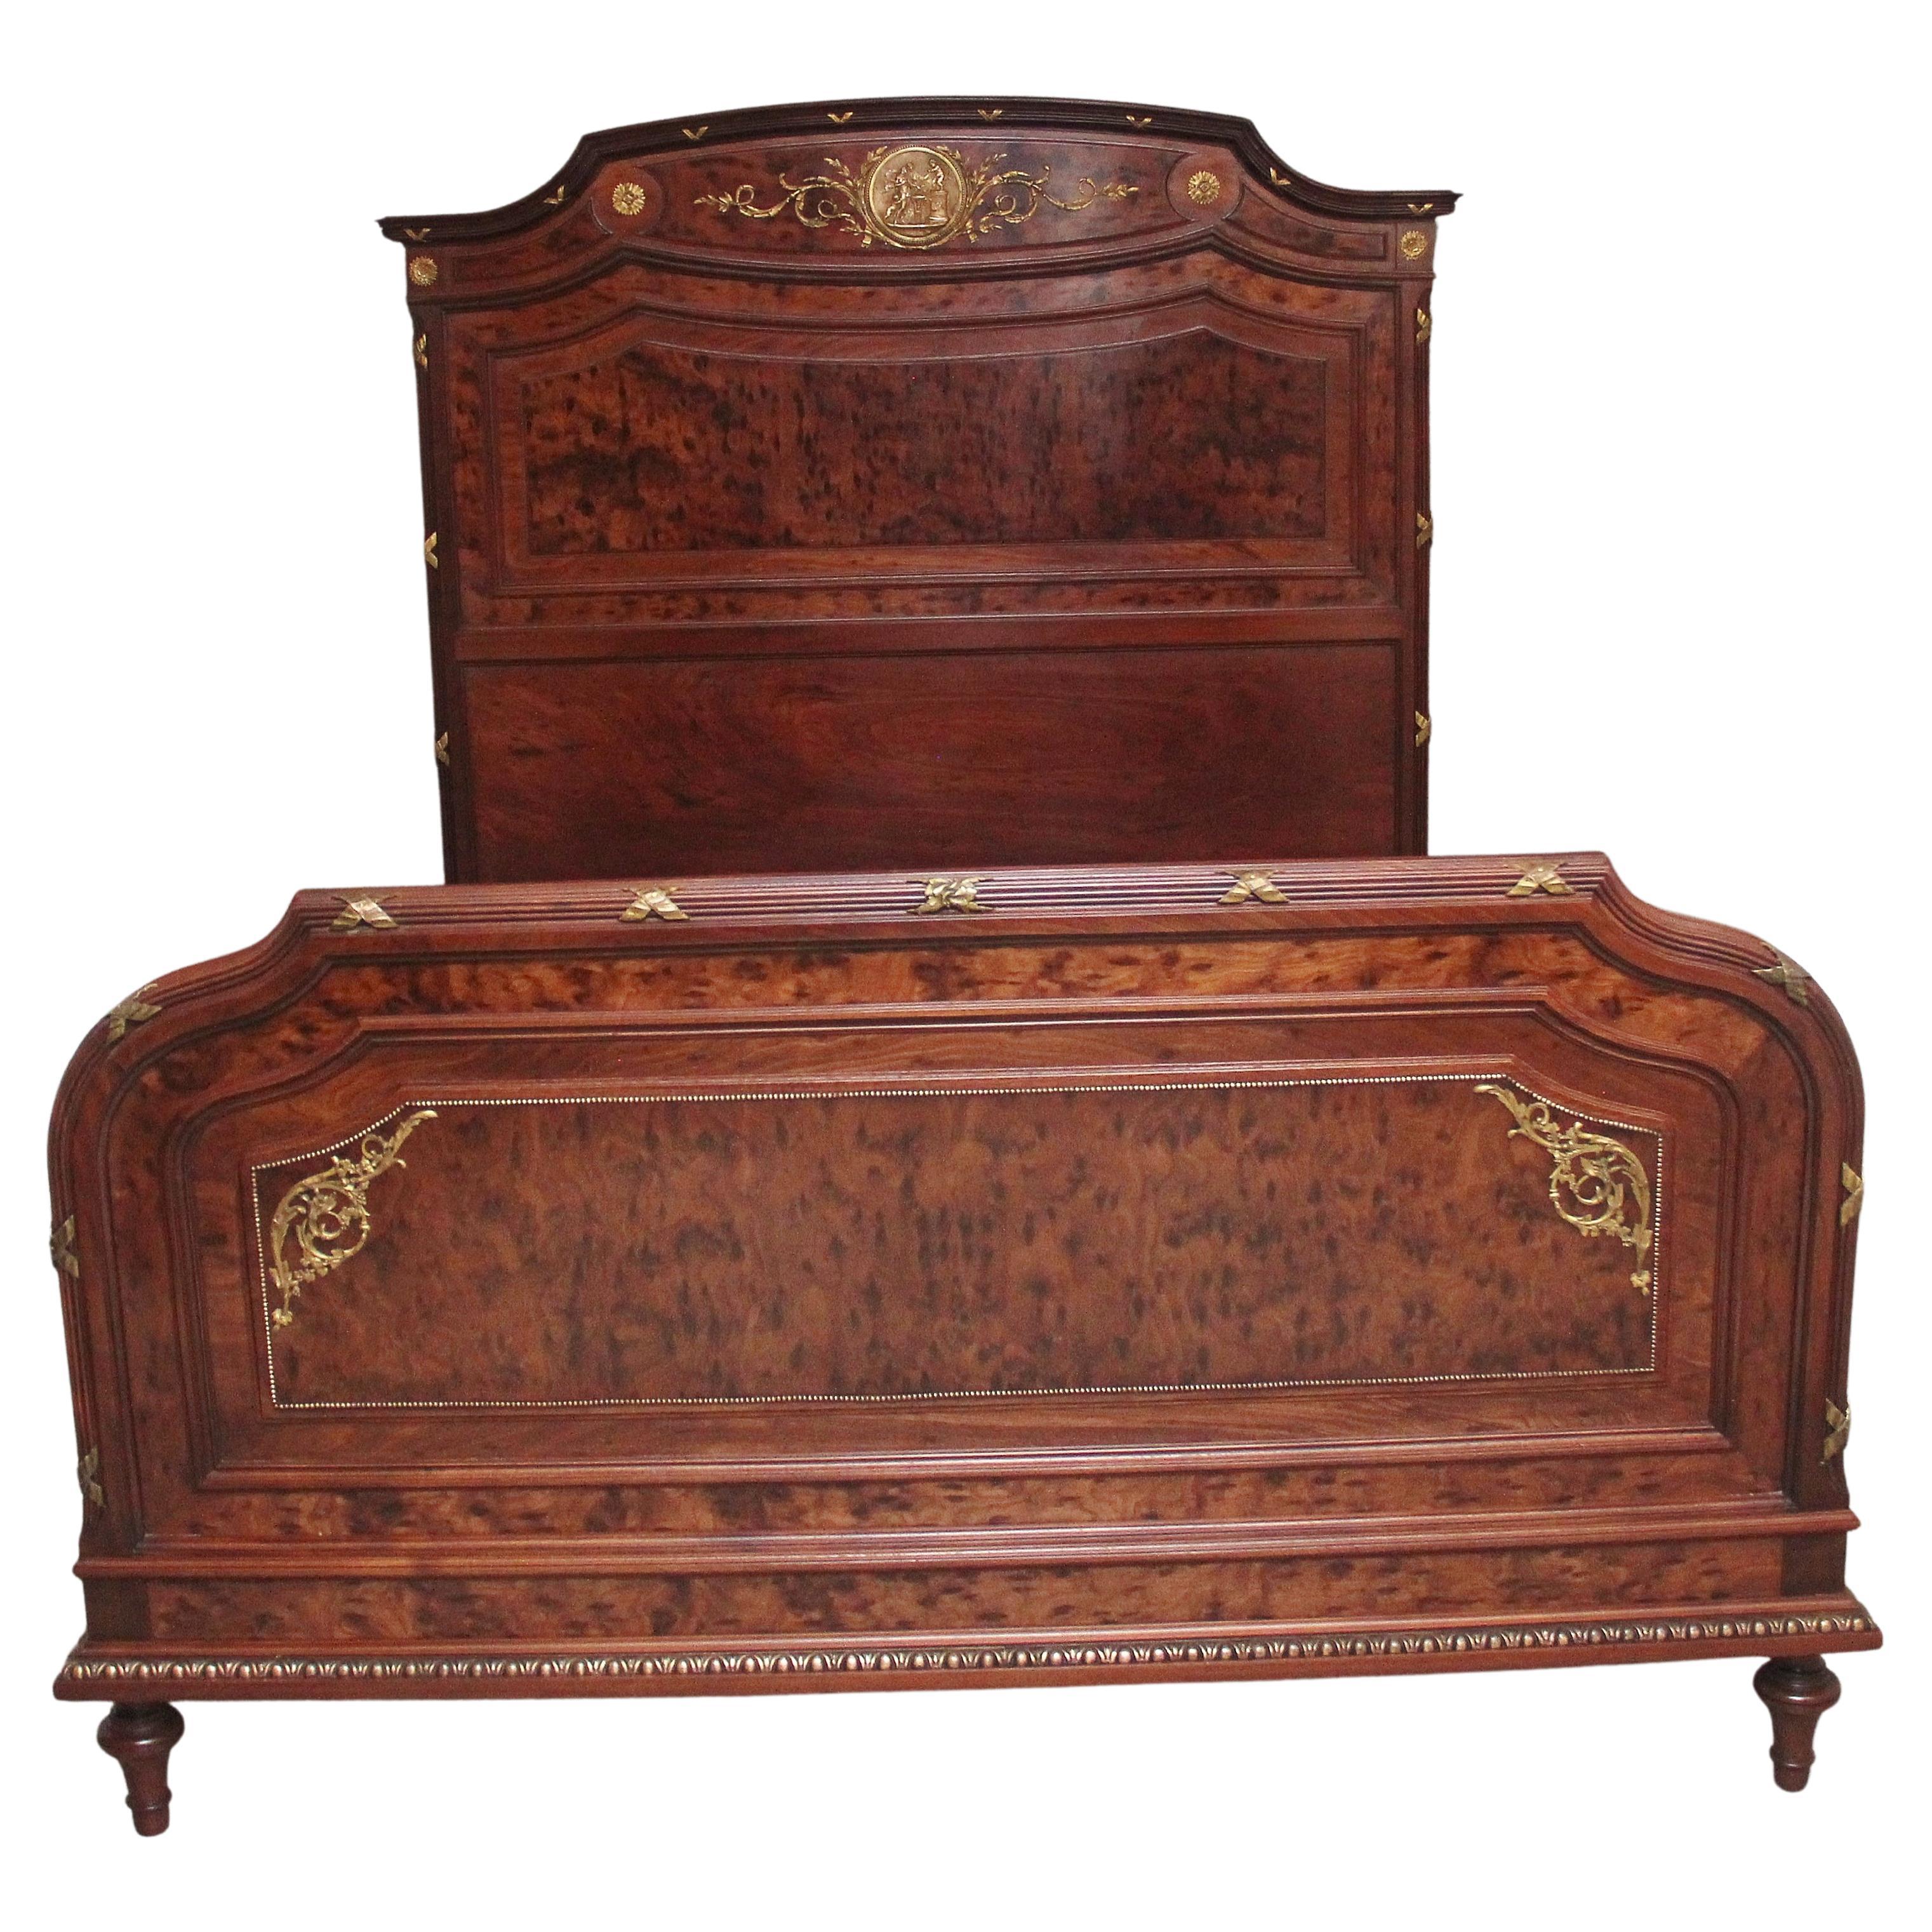 A fabulous quality 19th Century French plum pudding mahogany and brass bed in th For Sale